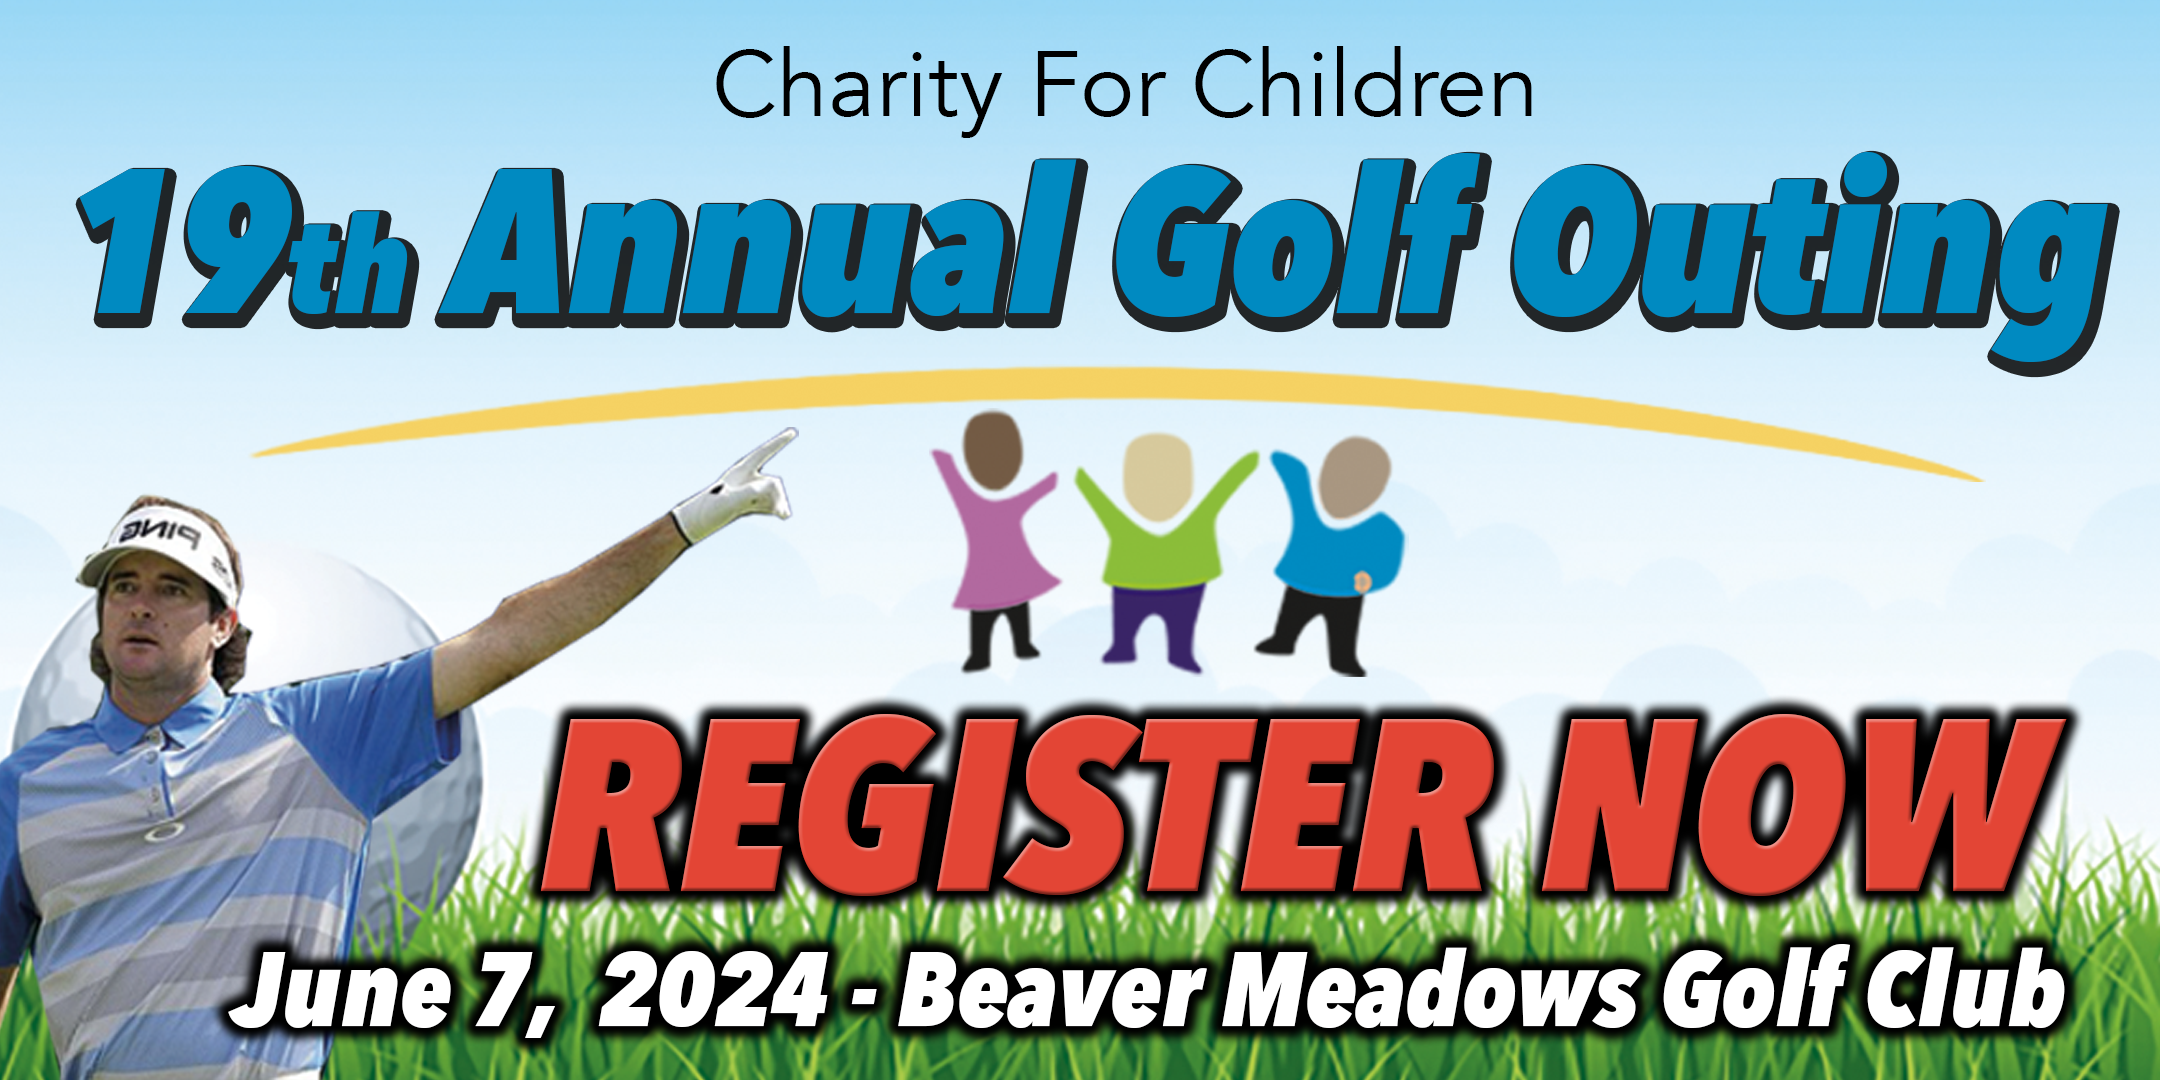 Charity For Children 19th Annual Golf Outing